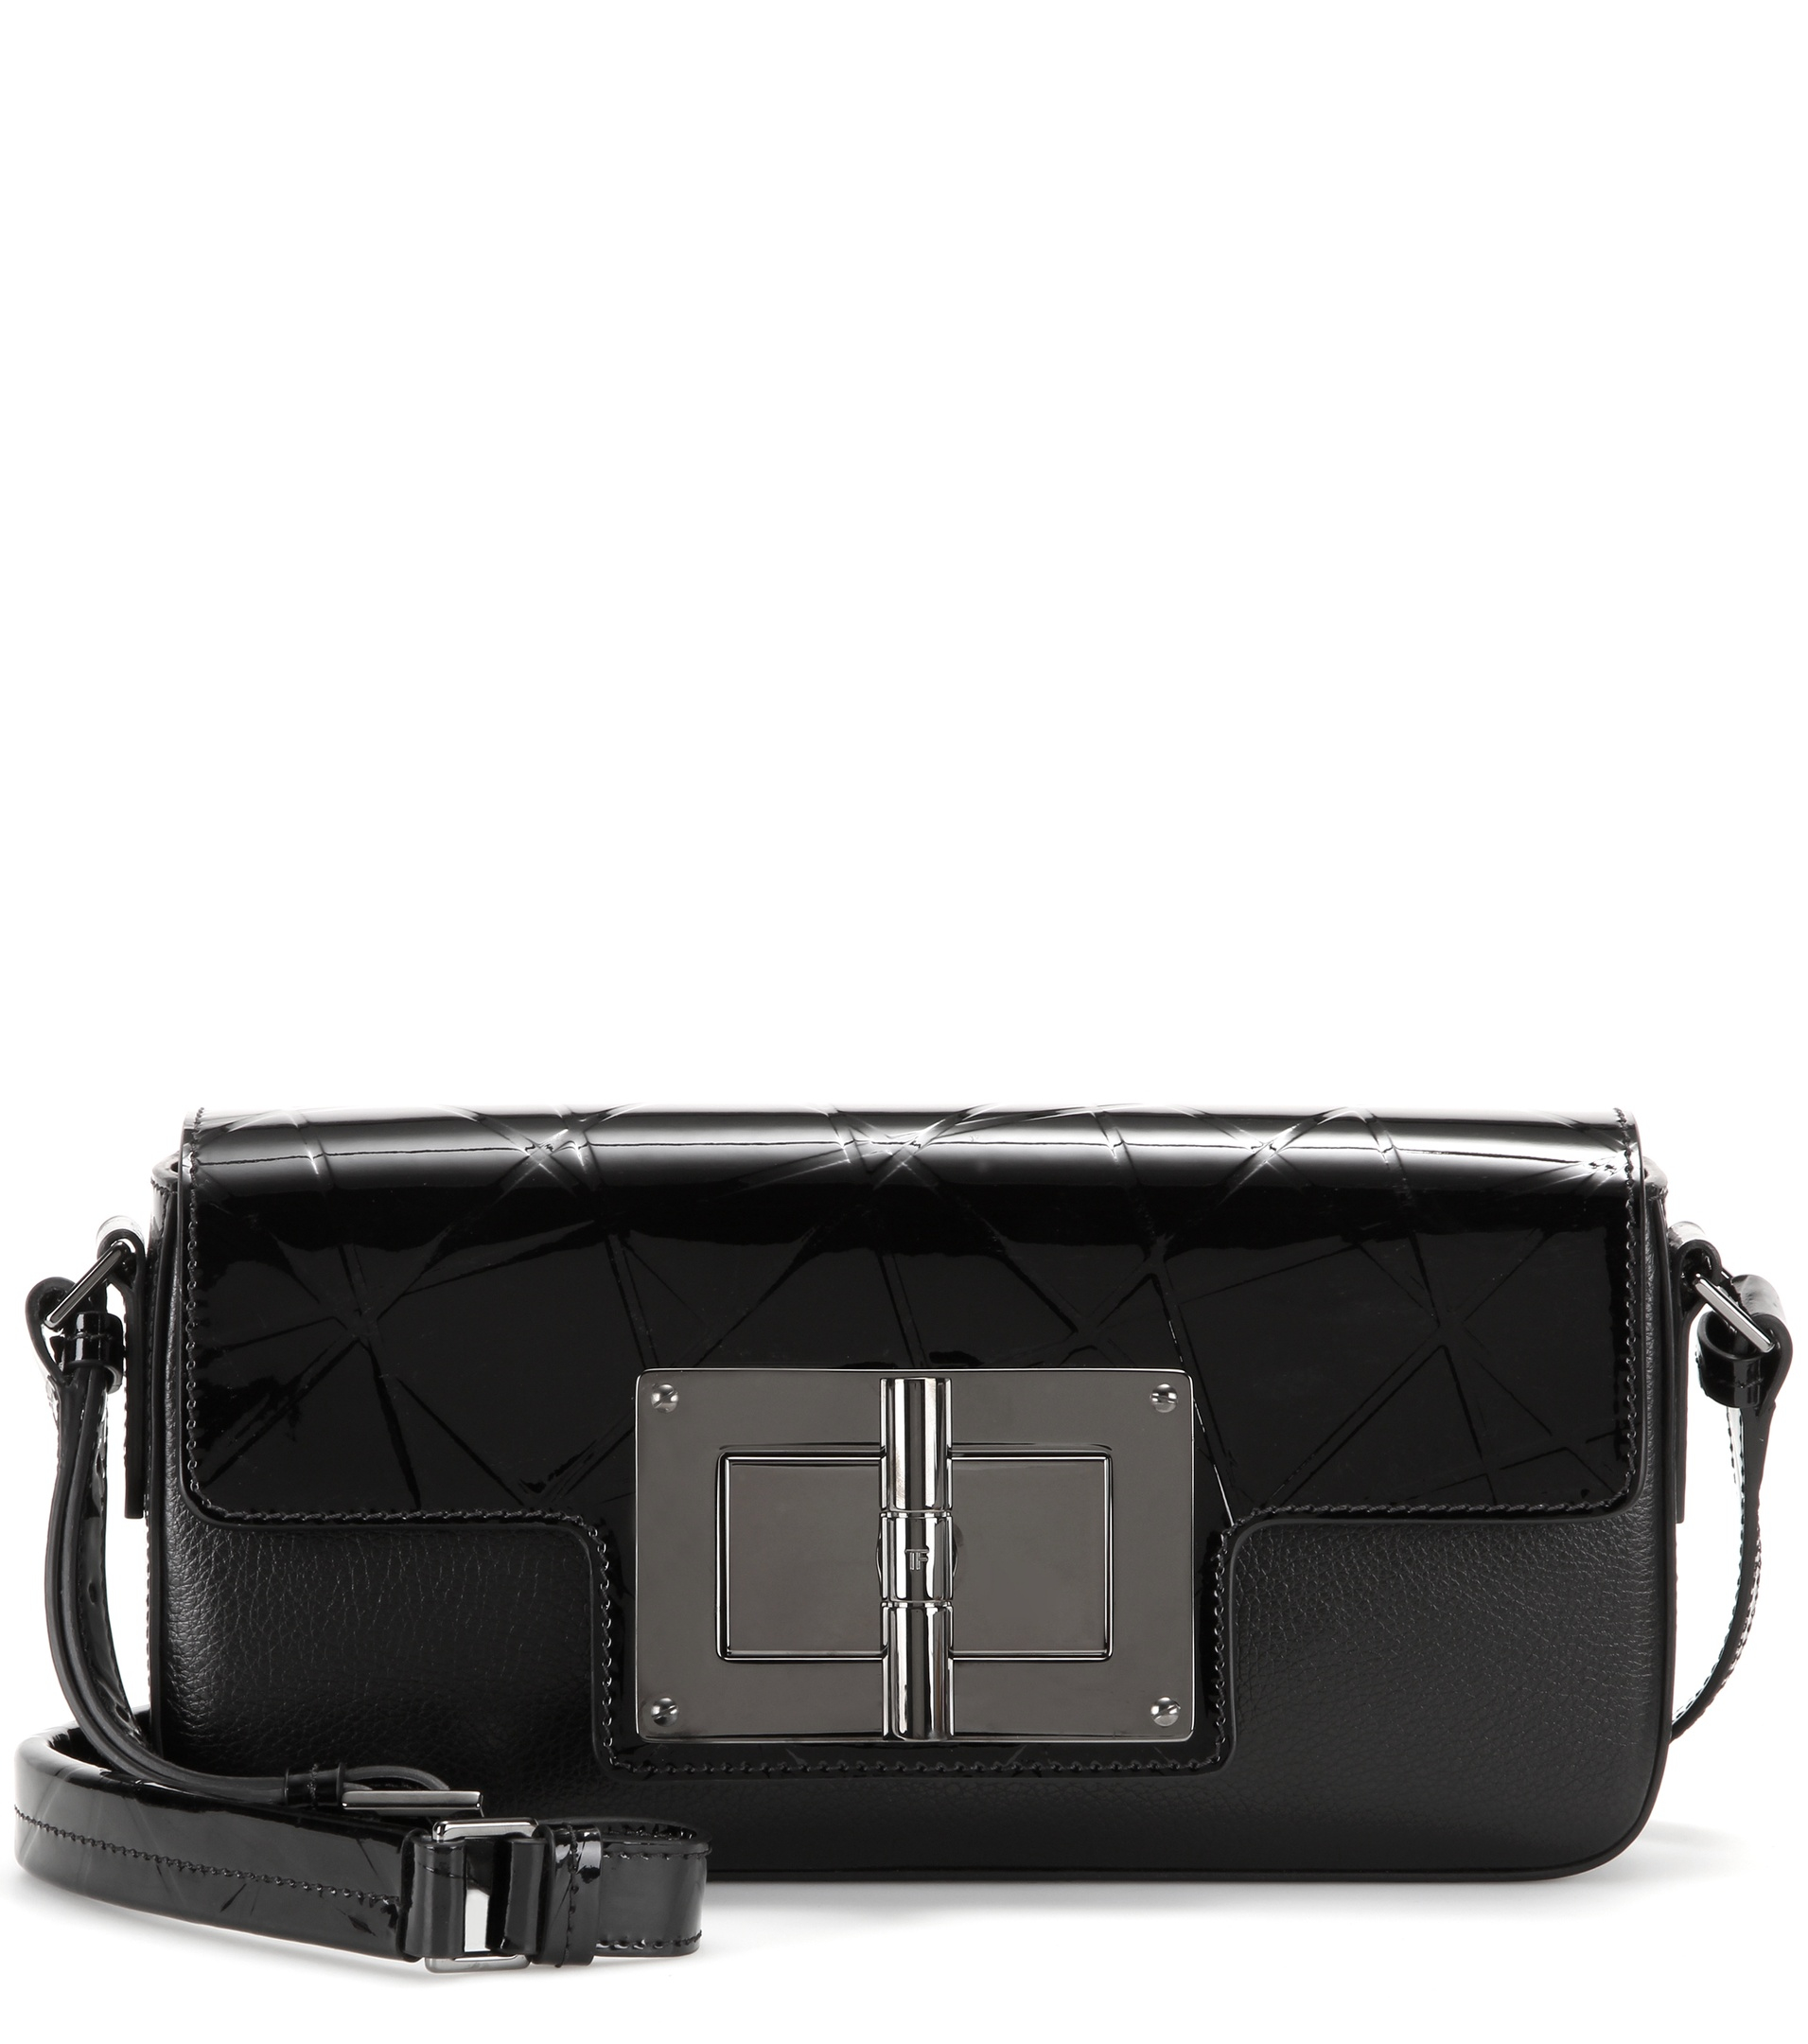 Tom Ford Natalia Day Patent Leather Shoulder Bag in Black (Metallic) - Lyst